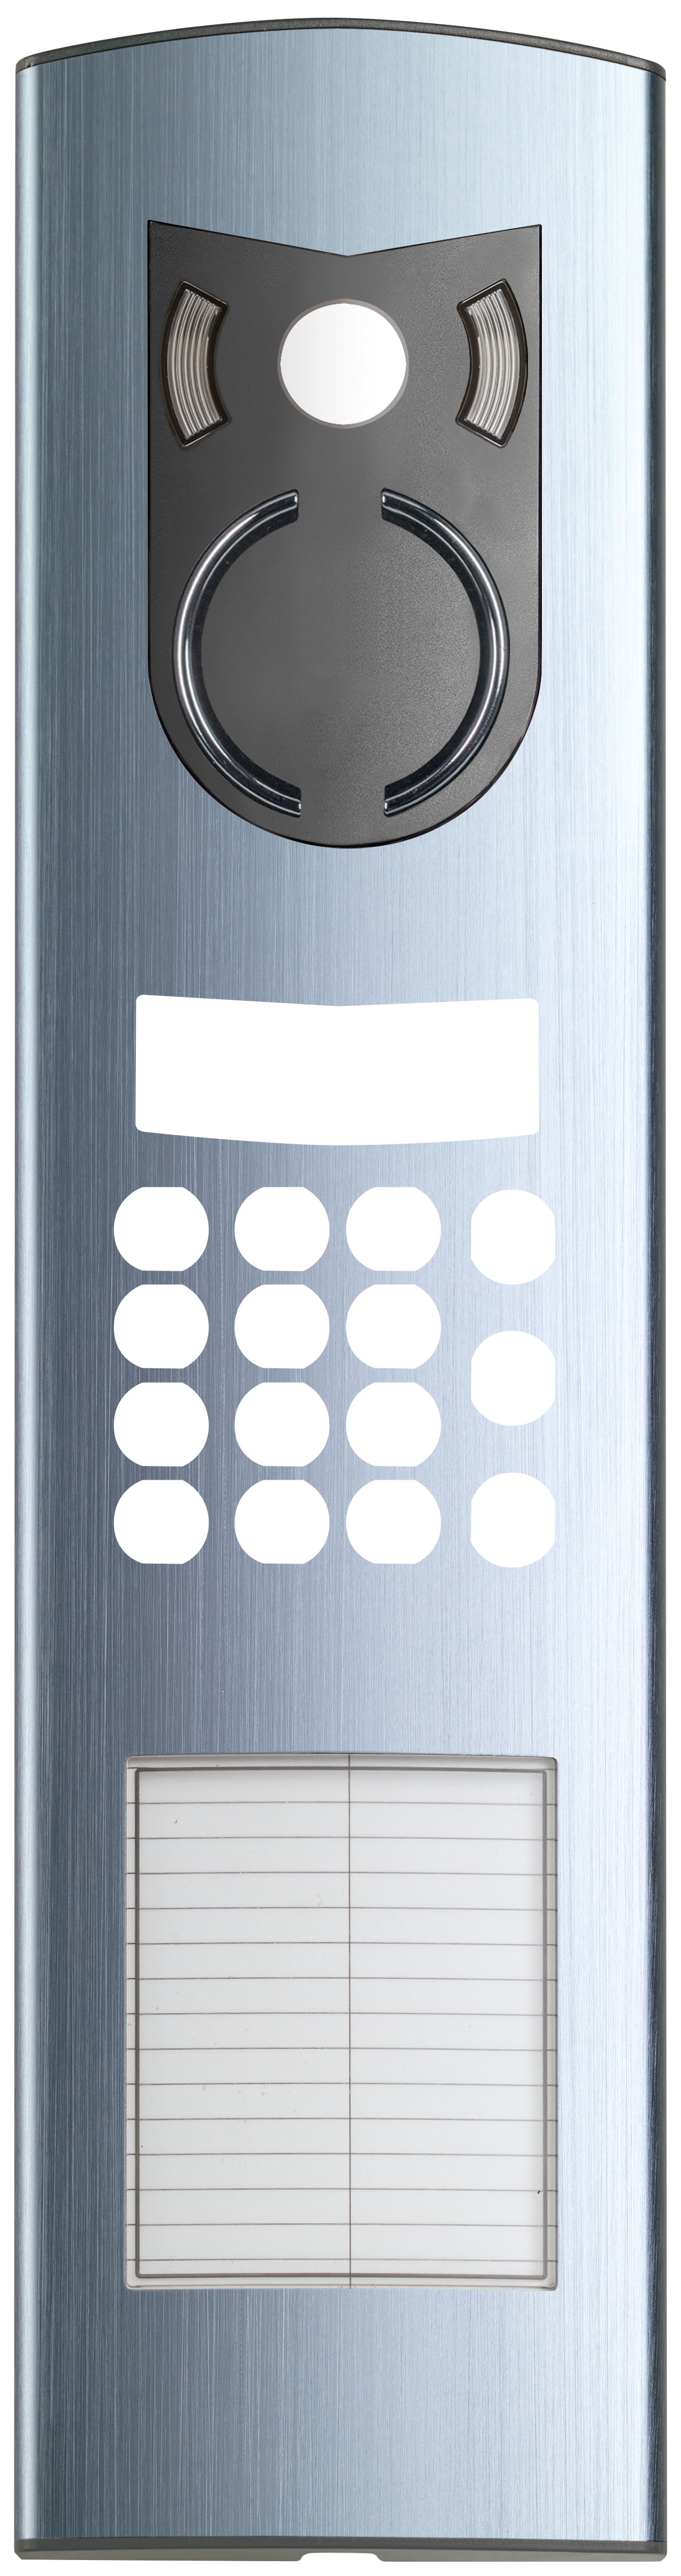 ELVOX 3 MODULE COVER PLATE SUITS 1300 SERIES SILVER 391Hx100Wx22D WITH KEYPAD & CAMERA CUTOUTS & CARD FOR 13 NAMES